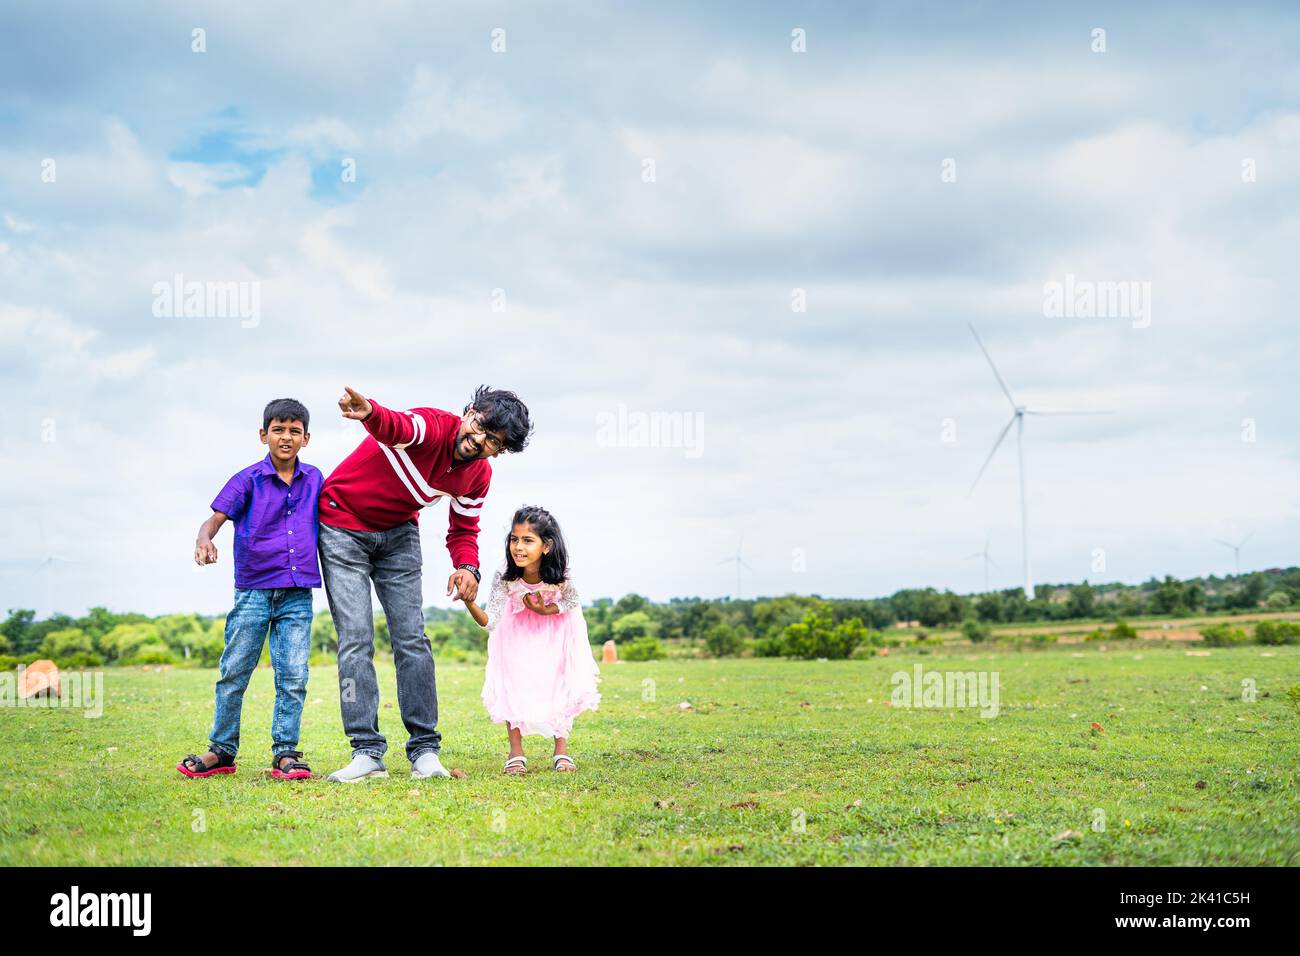 Happy indian father enjoying weekend with kid and showing wind fan at power station - concept of weekend, bonding and renewable energy. Stock Photo